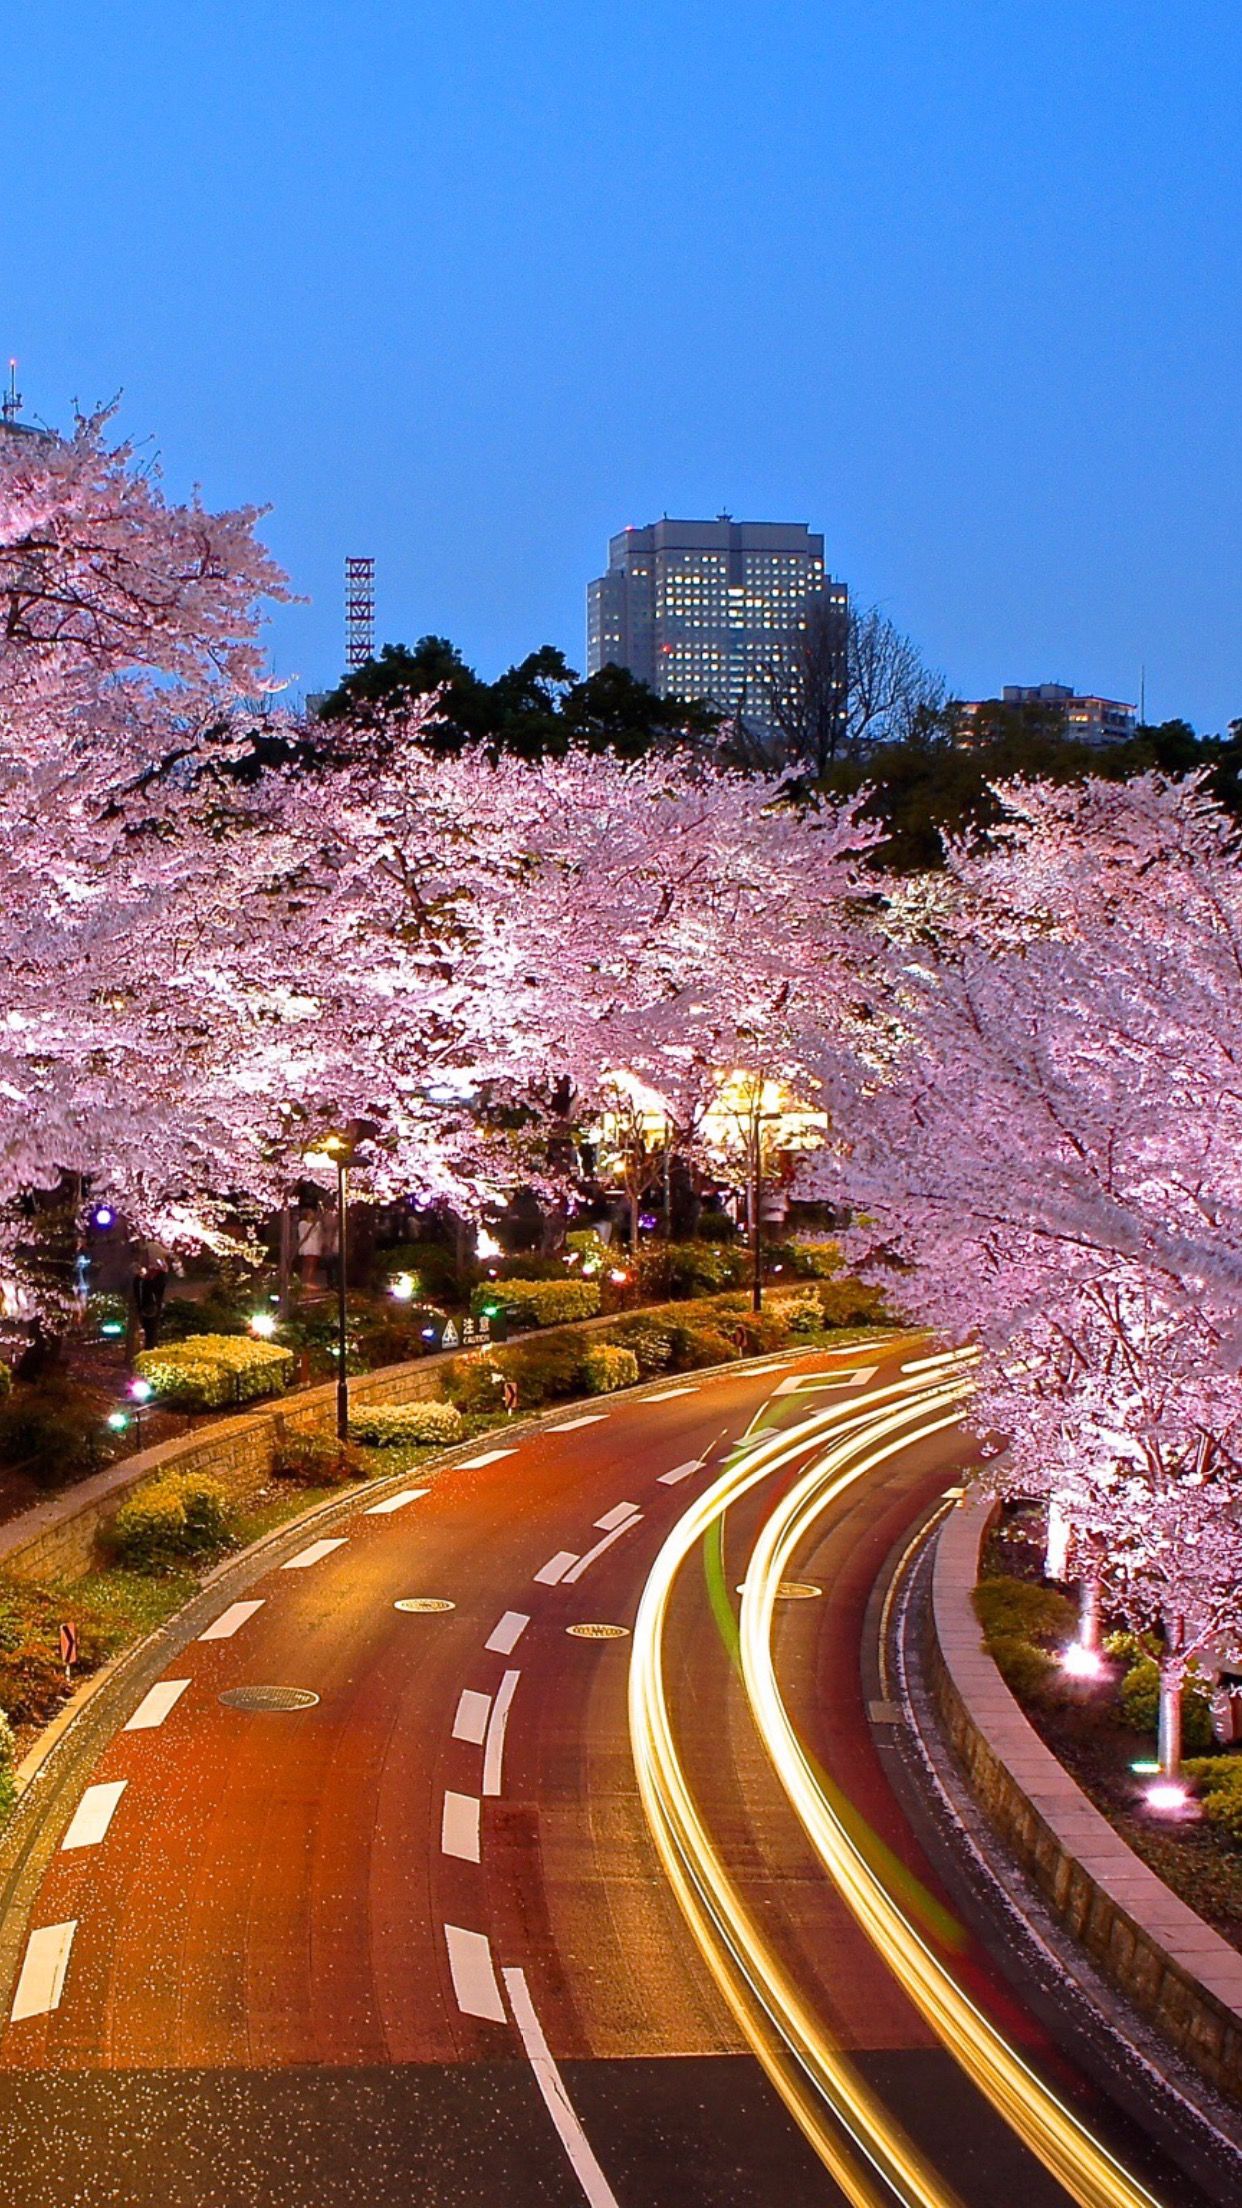 A city street at night with pink cherry blossom trees lining the road. - Cherry blossom